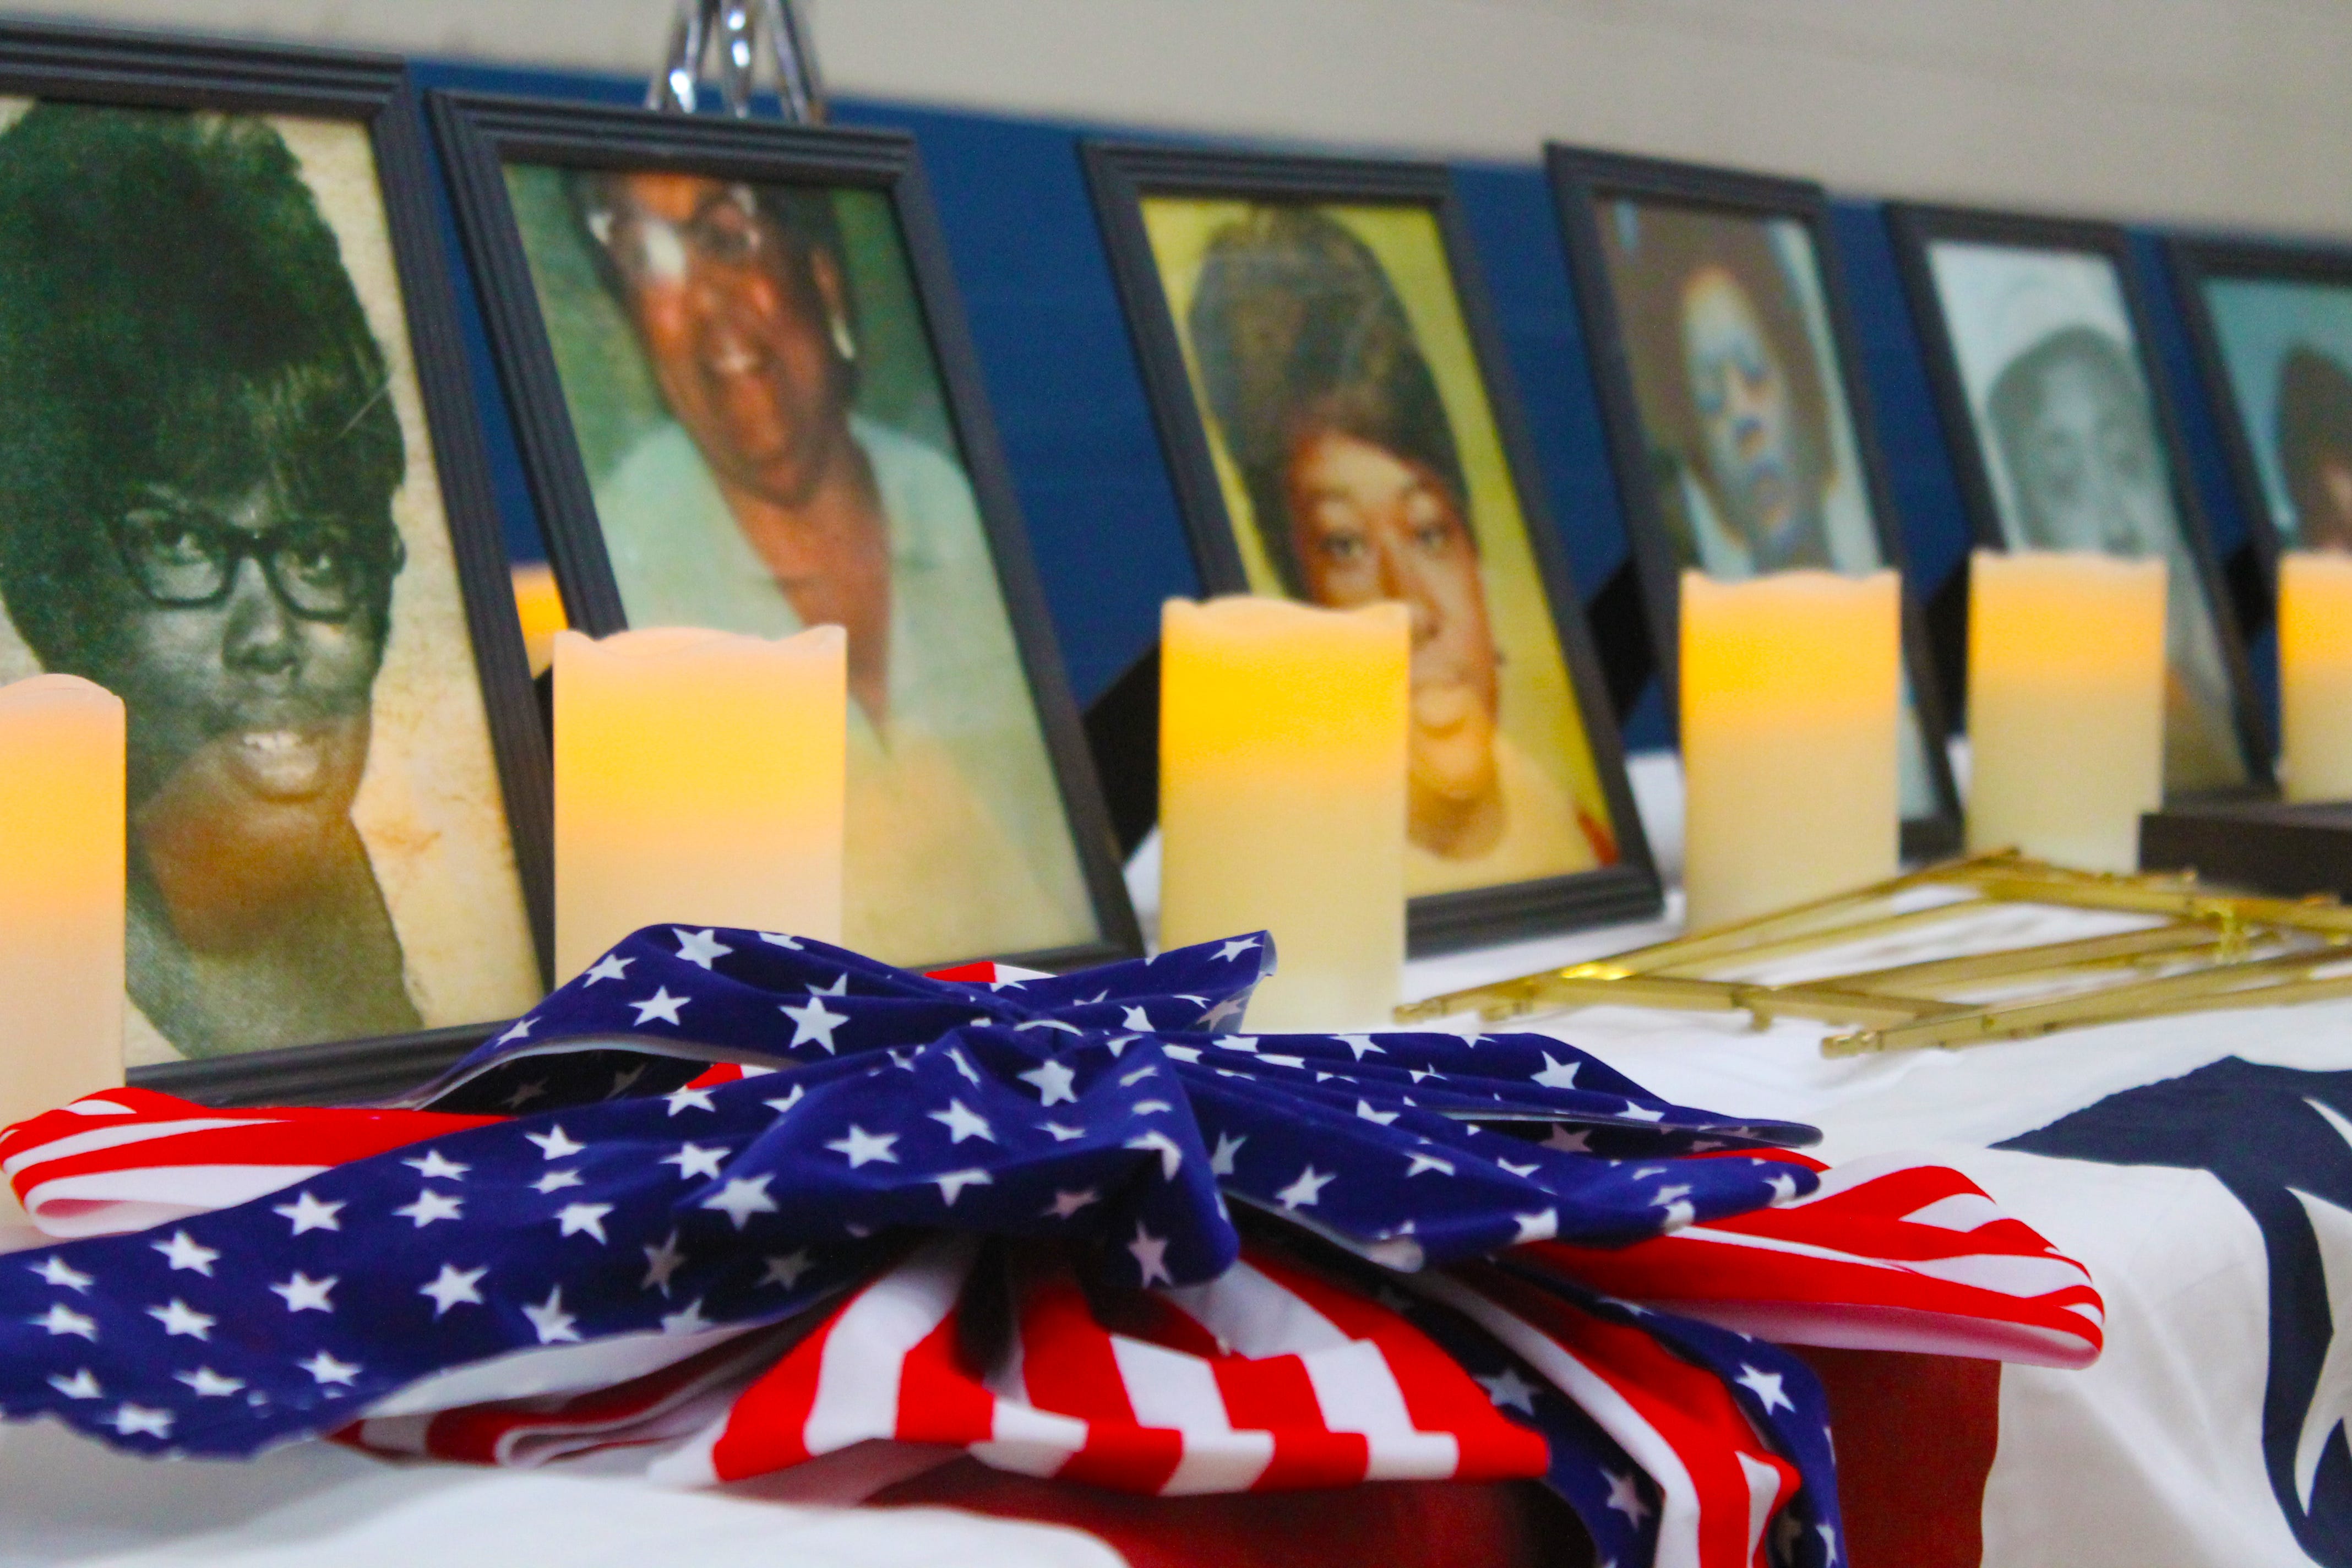 A U.S.A. banner sits alongside candles pictures of the victims of the Feb. 3 tragedy at the Thiokol plant in Woodbine.